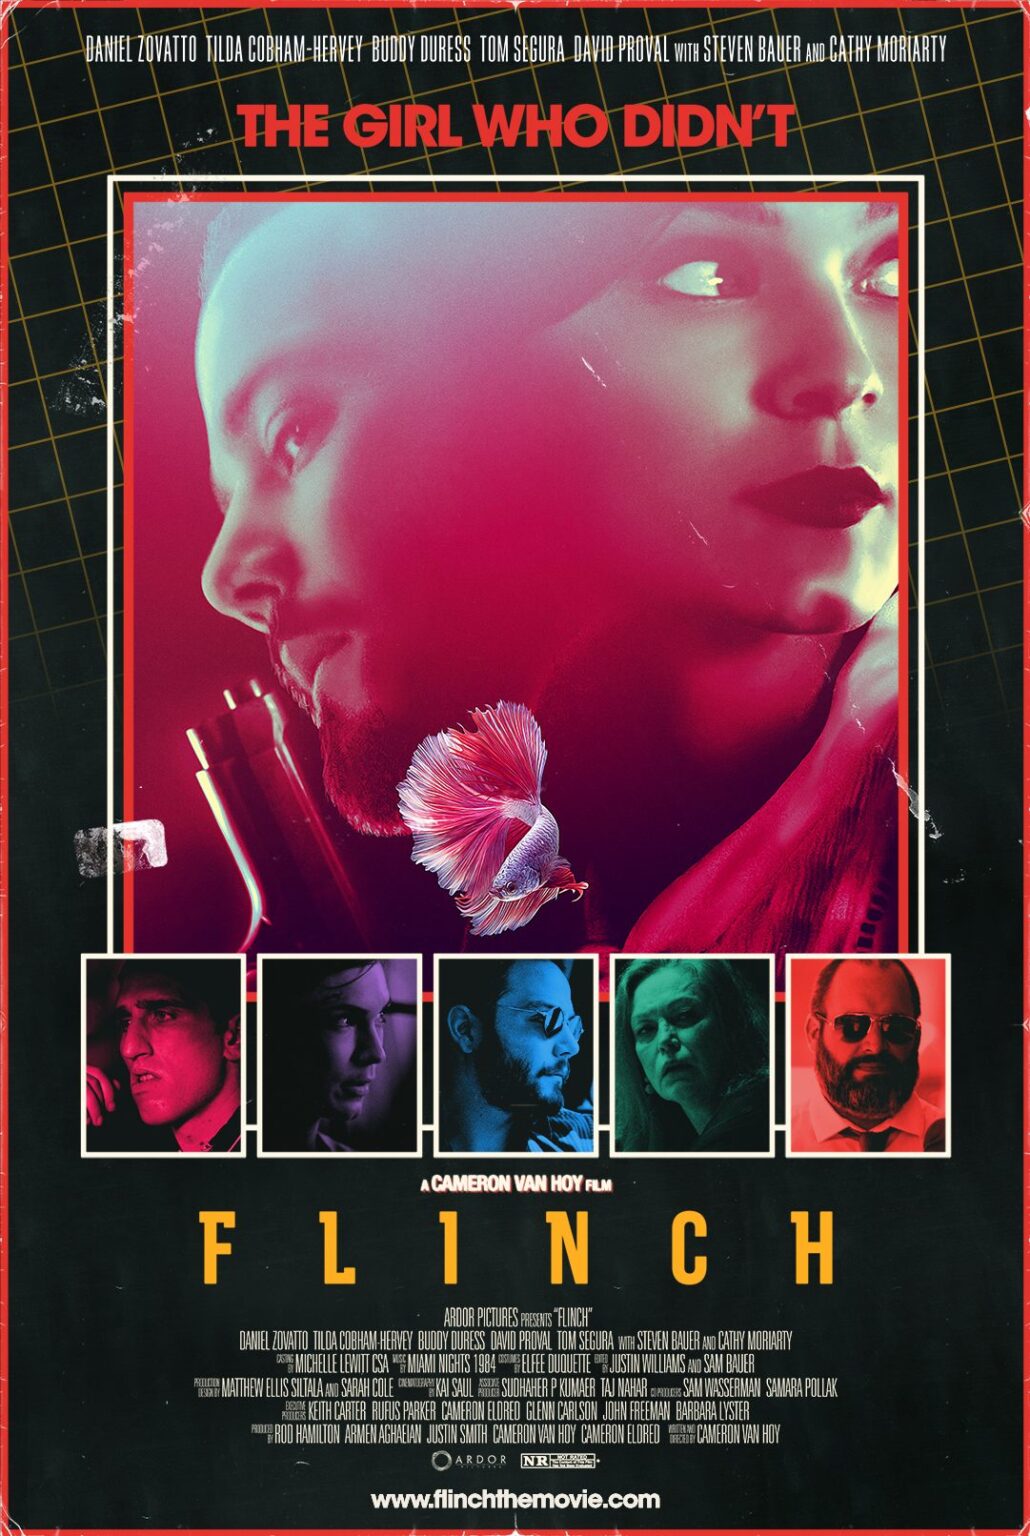 Cameron Van Hoy made his directorial debut with the stylish neo noir 'Flinch'. Learn more about Van Hoy and the film here.